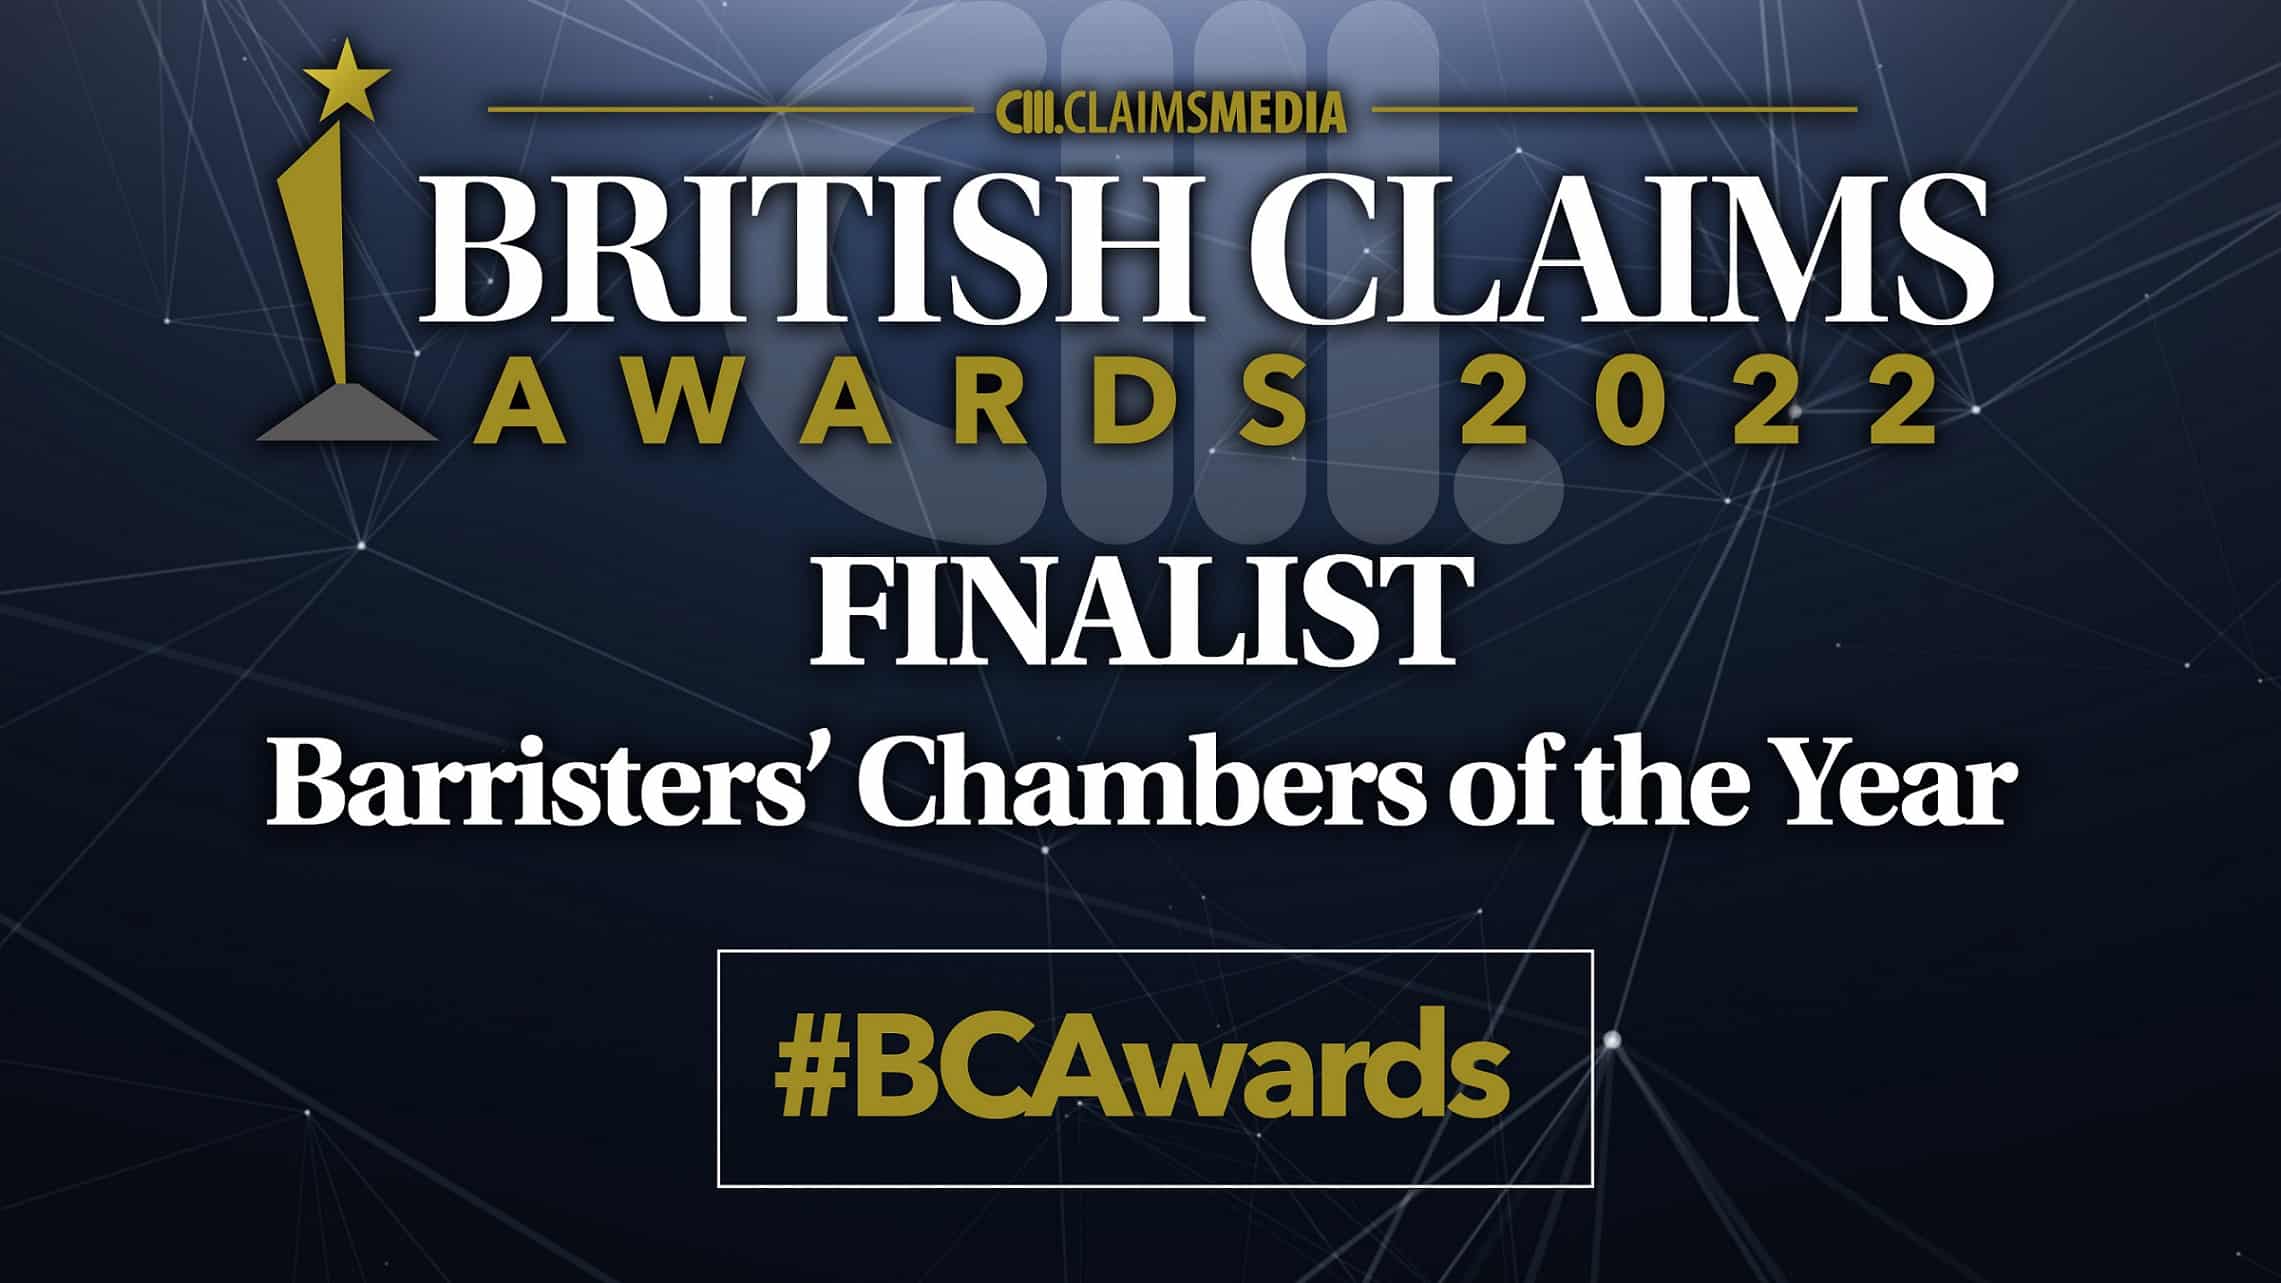 Parklane Plowden Chambers are shortlisted at the British Claims Awards 2022